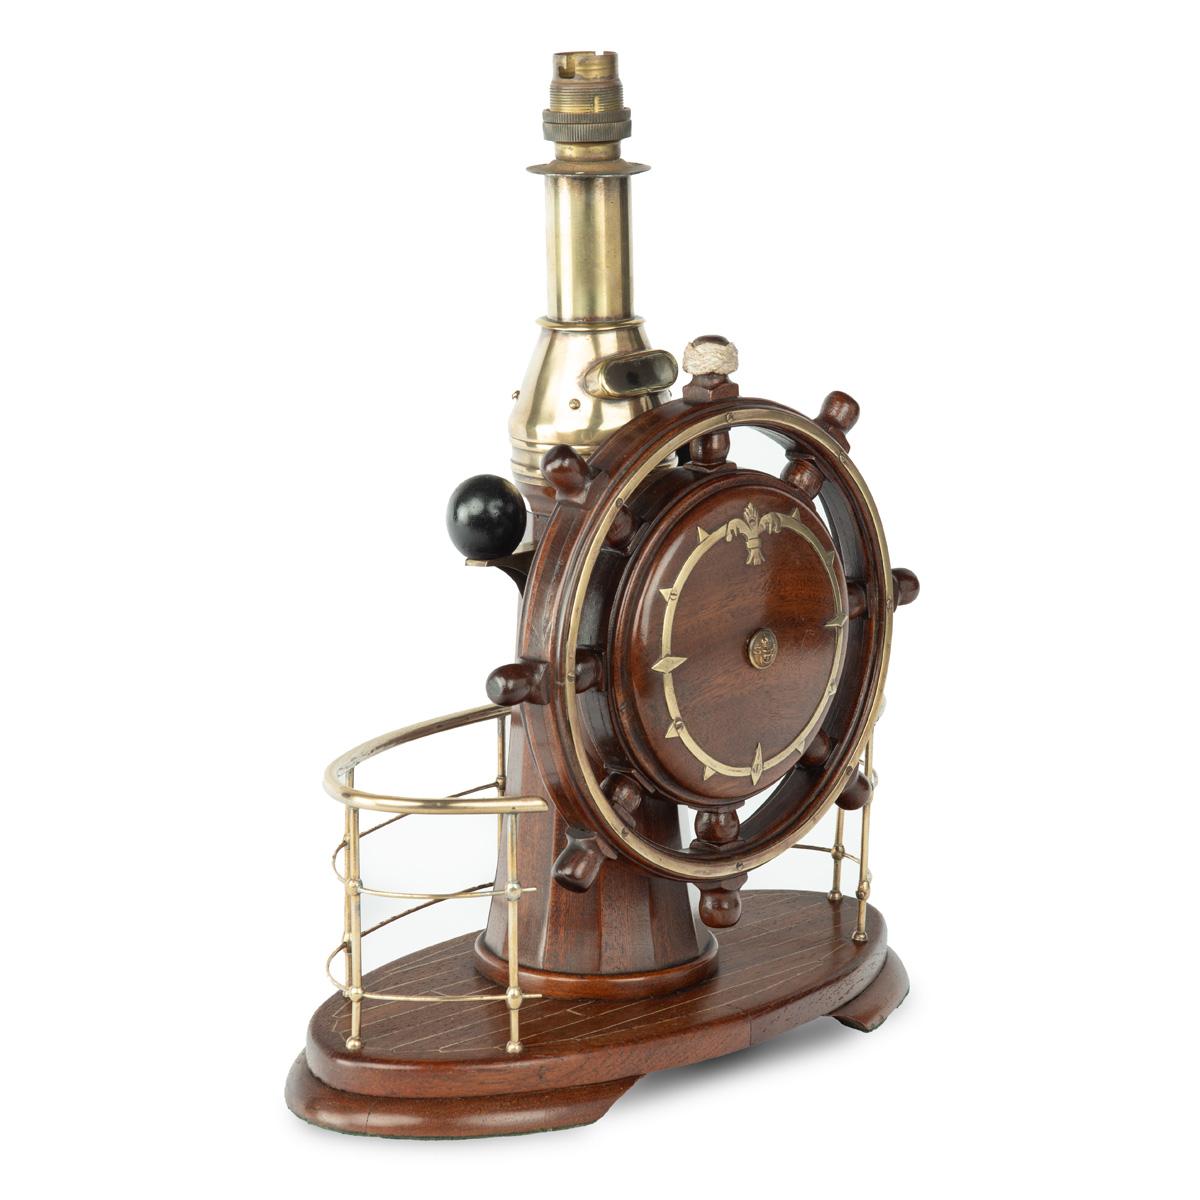 A novelty maritime teak, mahogany and brass table lamp, comprising a steering wheel attached to a binnacle, all within a brass railing, the wheel inlaid with a brass circlet and stylized fleur de lys, with the central button embossed with a naval